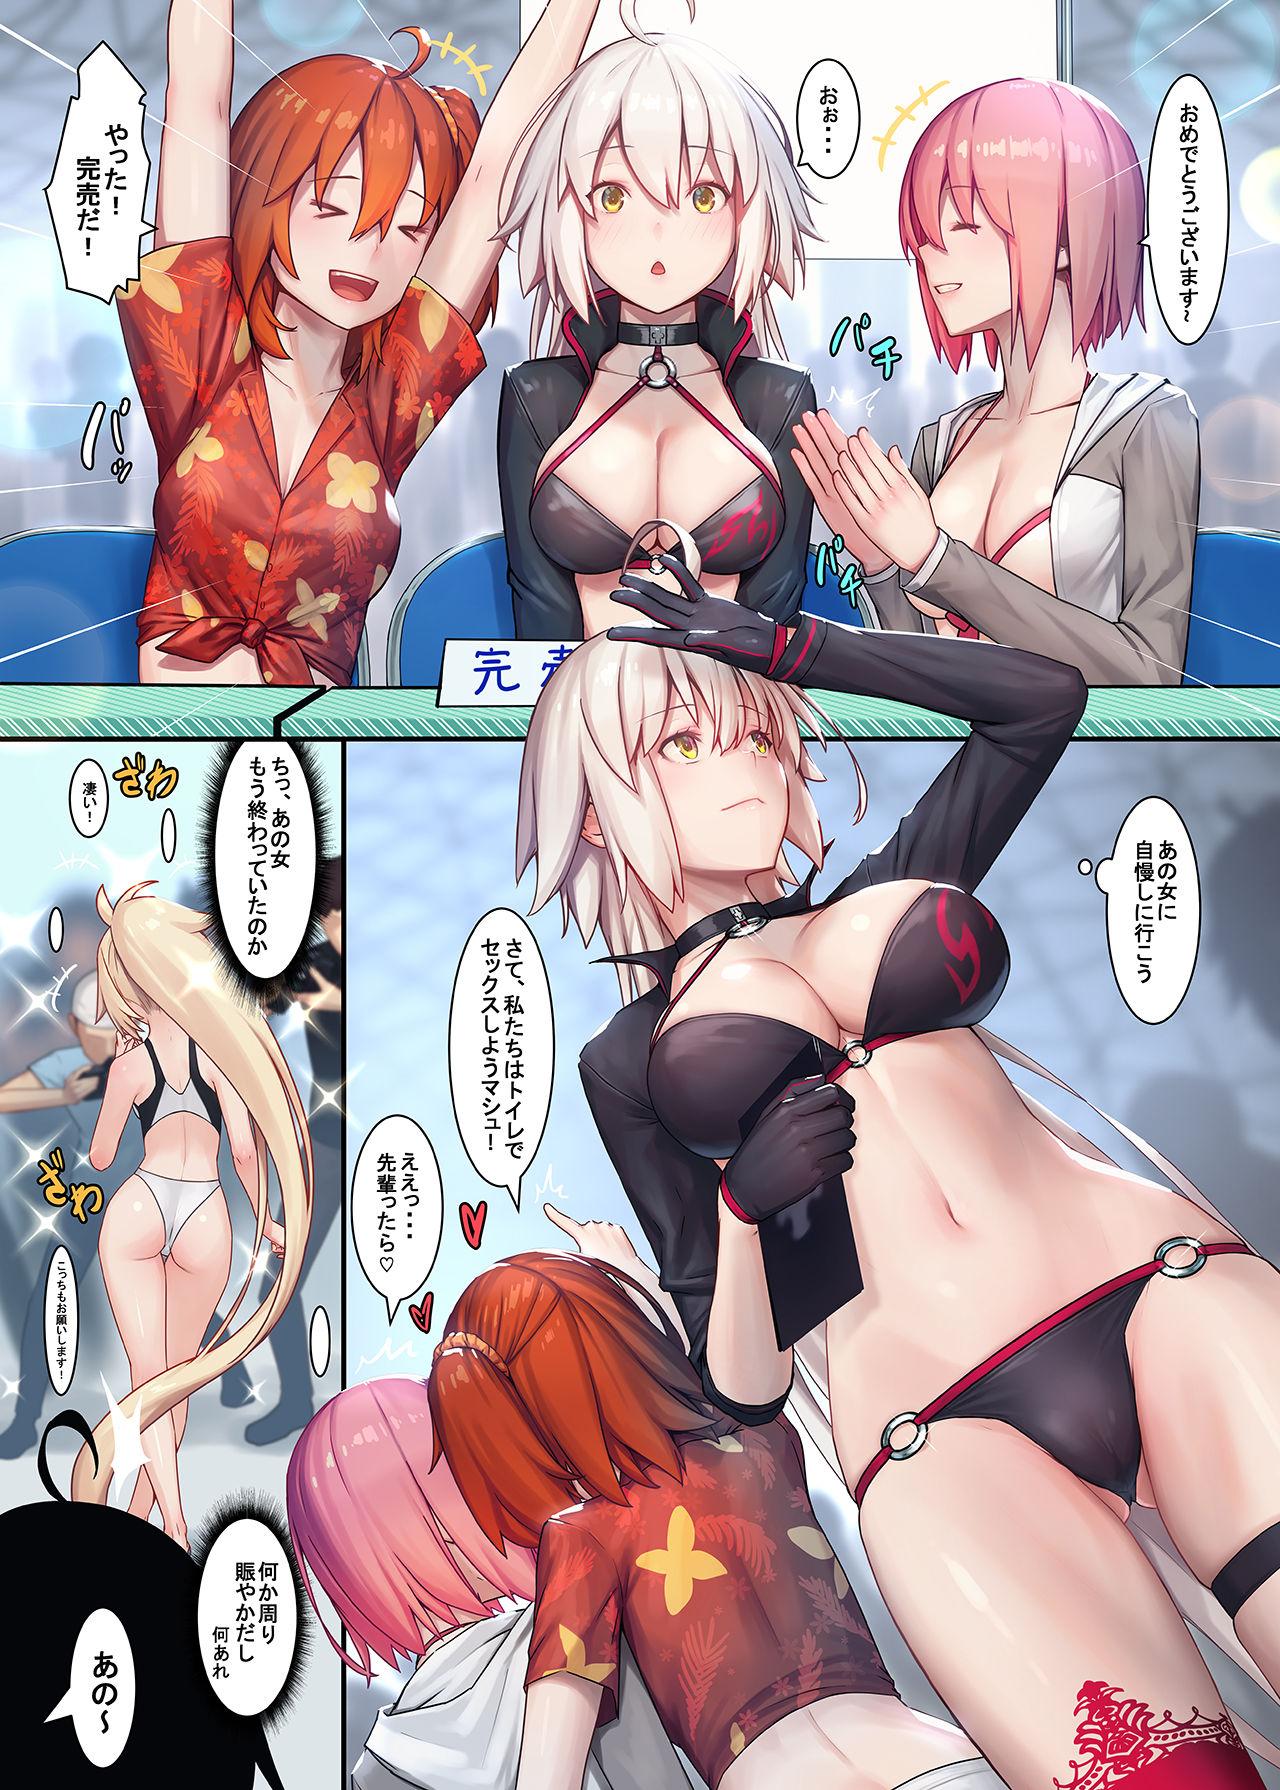 Soapy Massage Fate/Gentle Order 4 "Alter" - Fate grand order Asses - Page 3